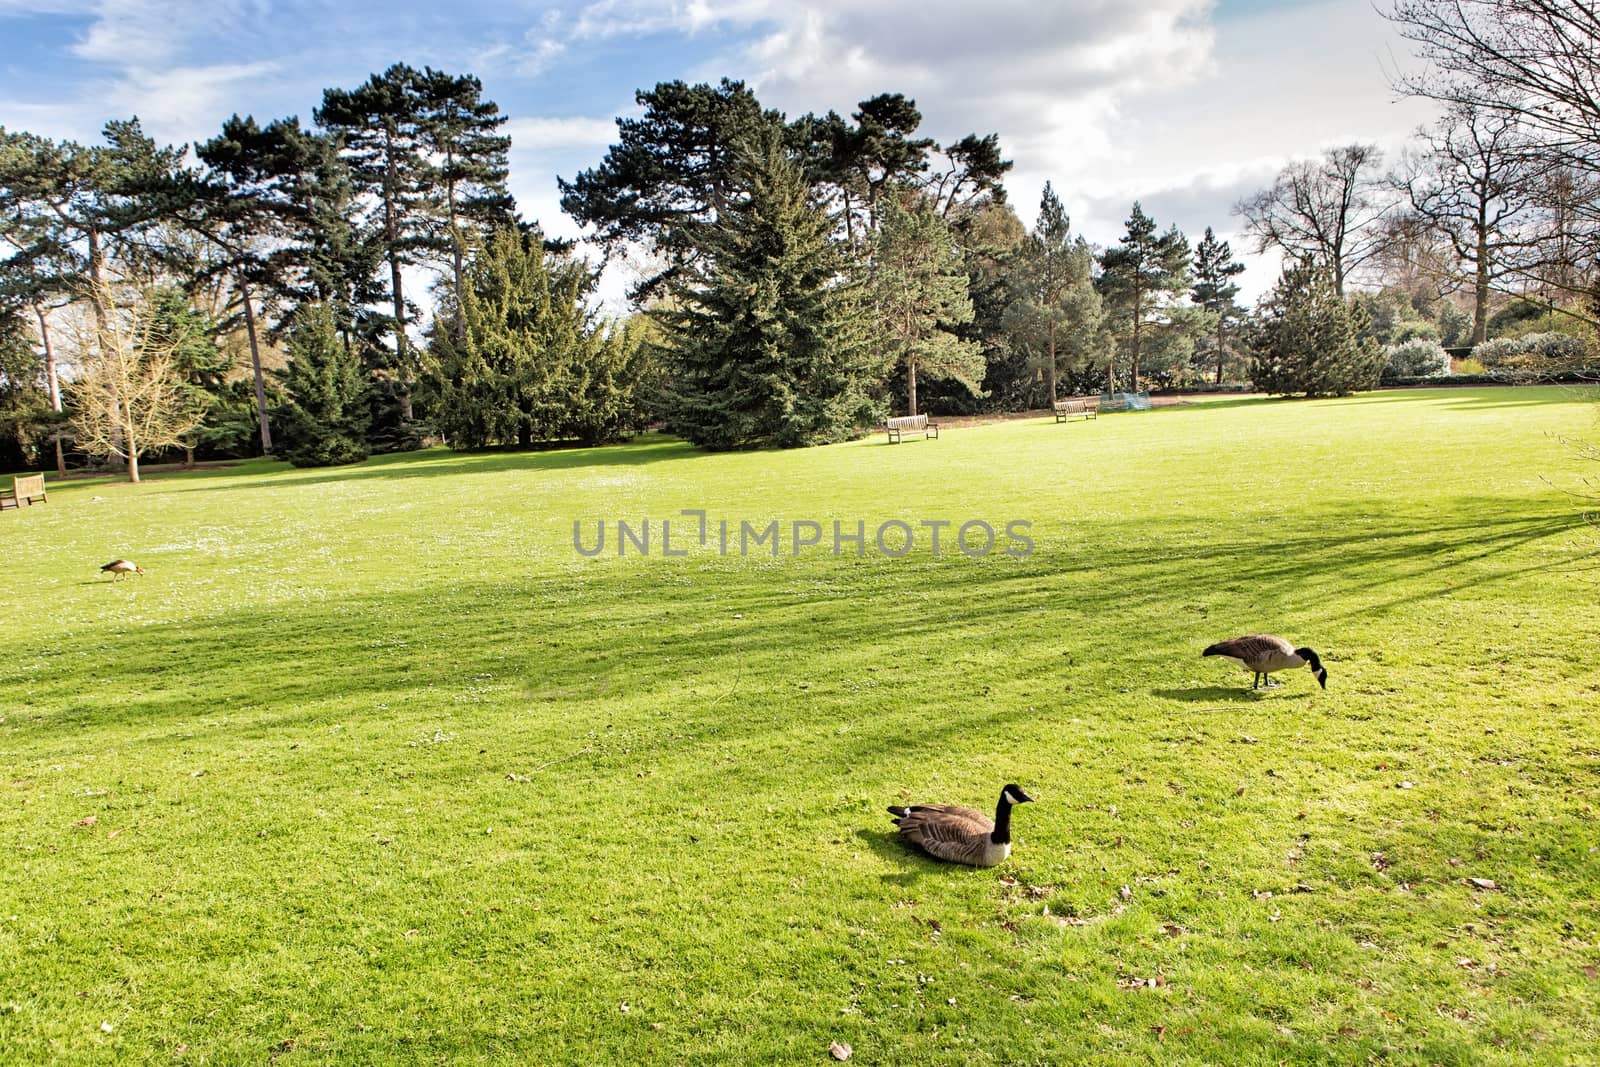 Geese on a green lawn in the park